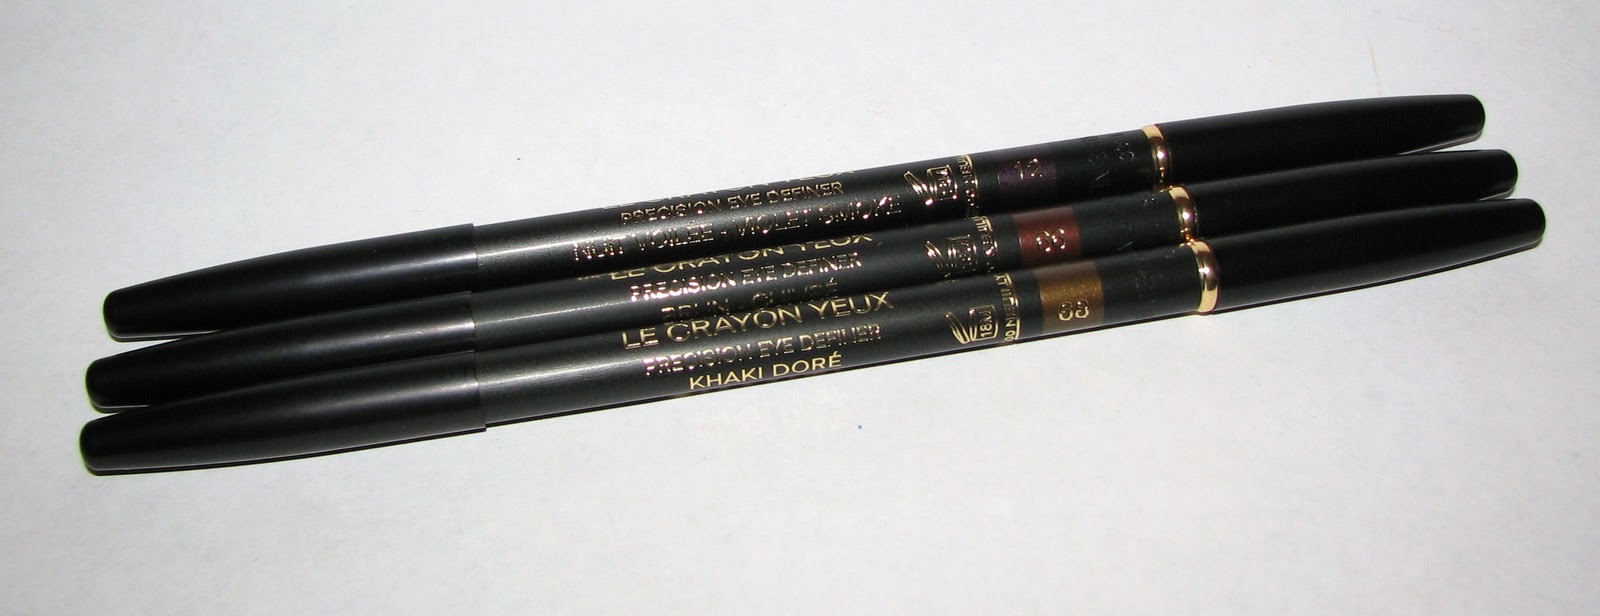 Chanel VIOLET SMOKE, BRUN, KHAKI DORE Le Crayon Yeux Precision Eye Definer  Swatches and Review - Blushing Noir